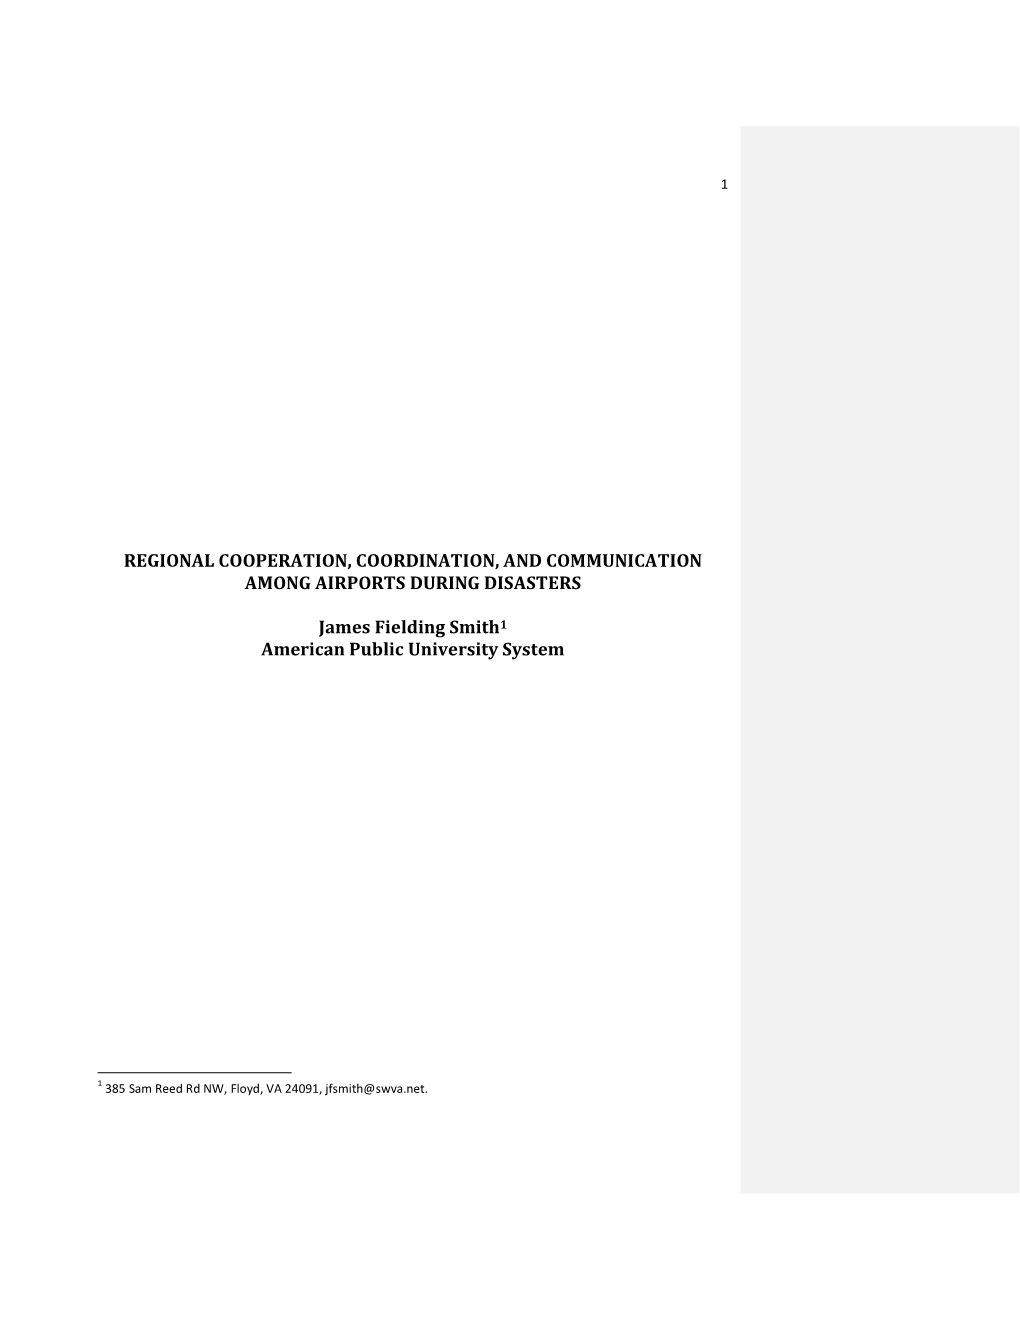 Final Report, Airport Study 2009, "Regional Cooperation